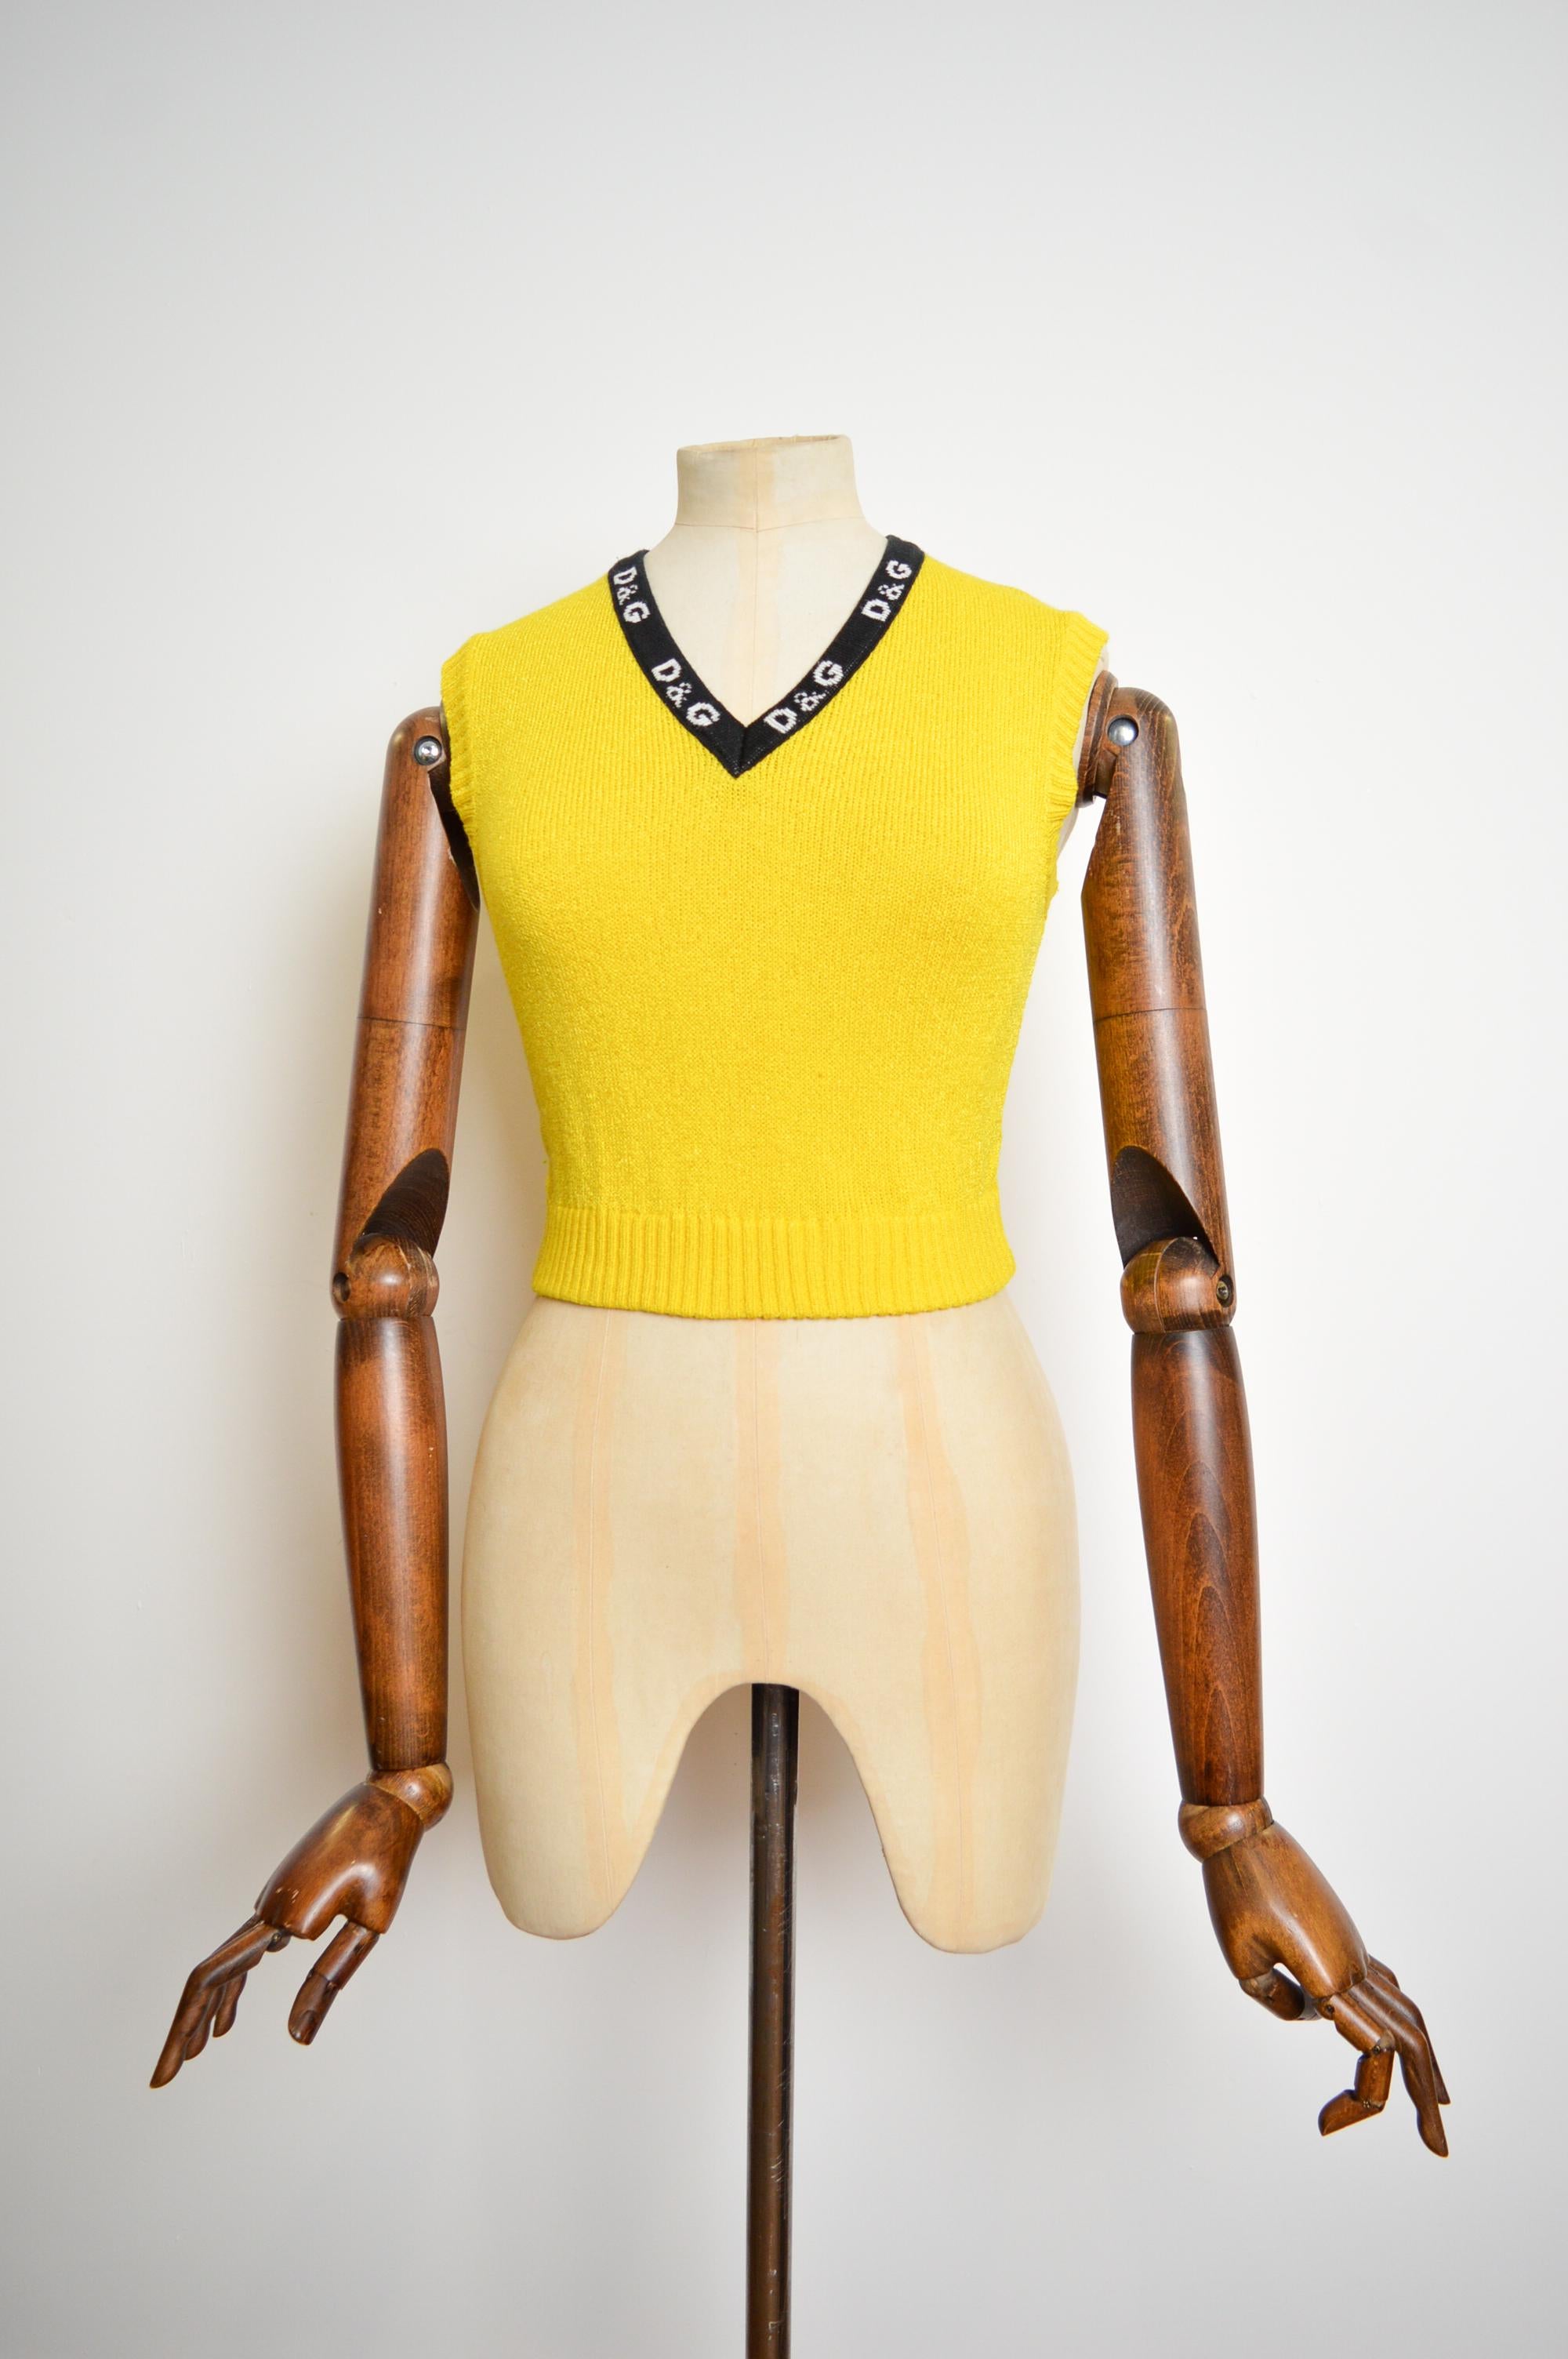 Spring / Summer 1996 DOLCE & GABBANA Knitted Vibrant yellow Cropped Cardigan & Tank Baby Vest with the 'D&G' Tape detailing.

Incredible worn Together & apart to create so many different looks !

MADE IN ITALY.

Features : Ribbed knit stretchy